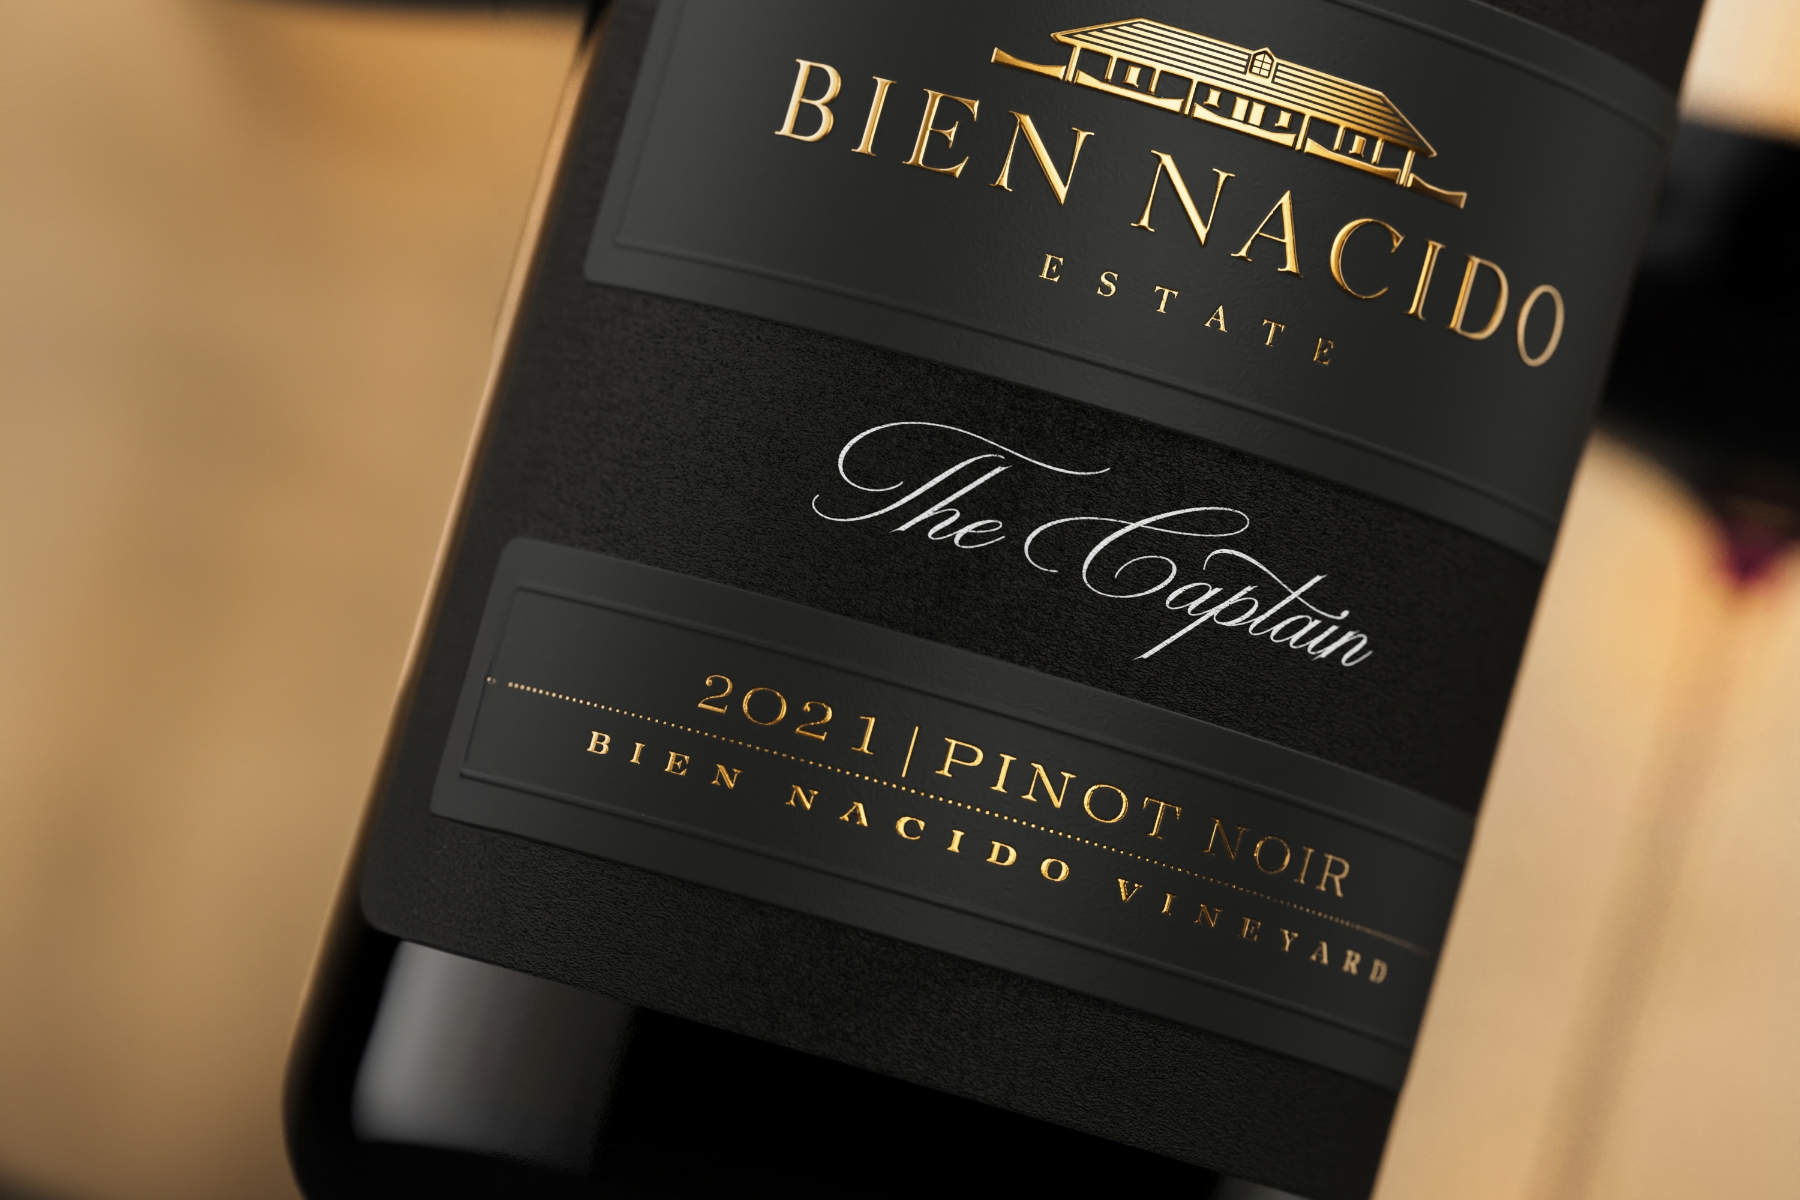 Bien Nacido Estate's Black Label redesign and the behind story